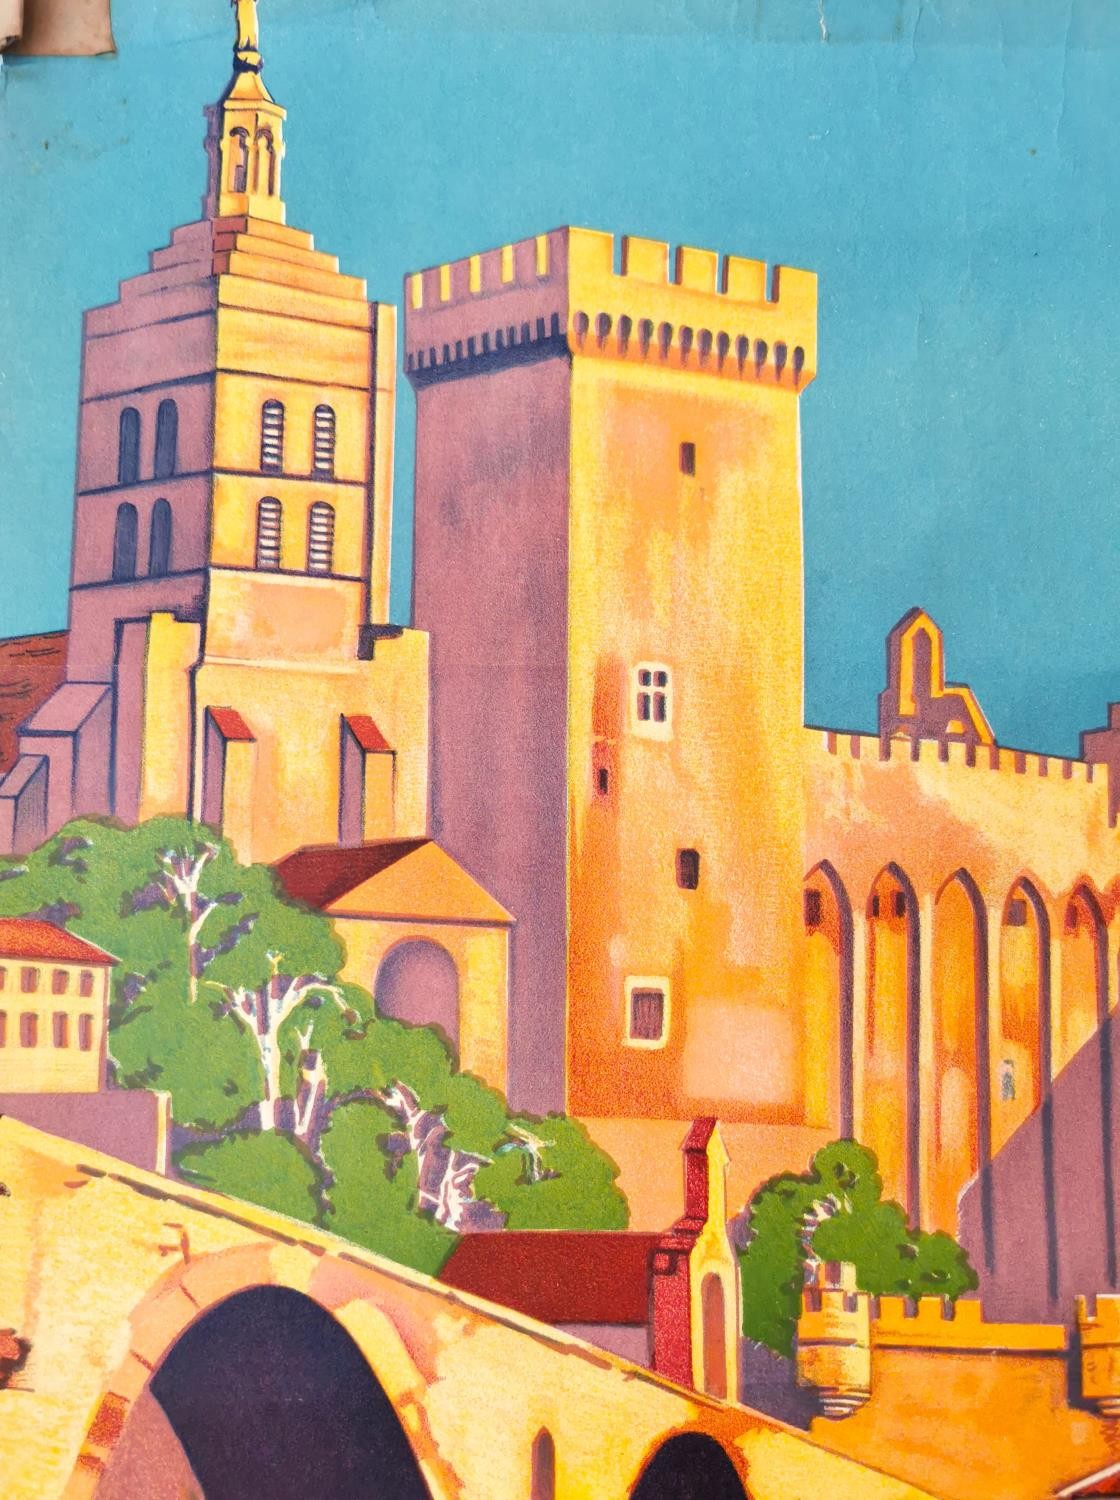 Roger Broders (1883-1953) Avignon, The City of Popes lithographic poster, 1921. H.90 W.60cm - Image 5 of 10